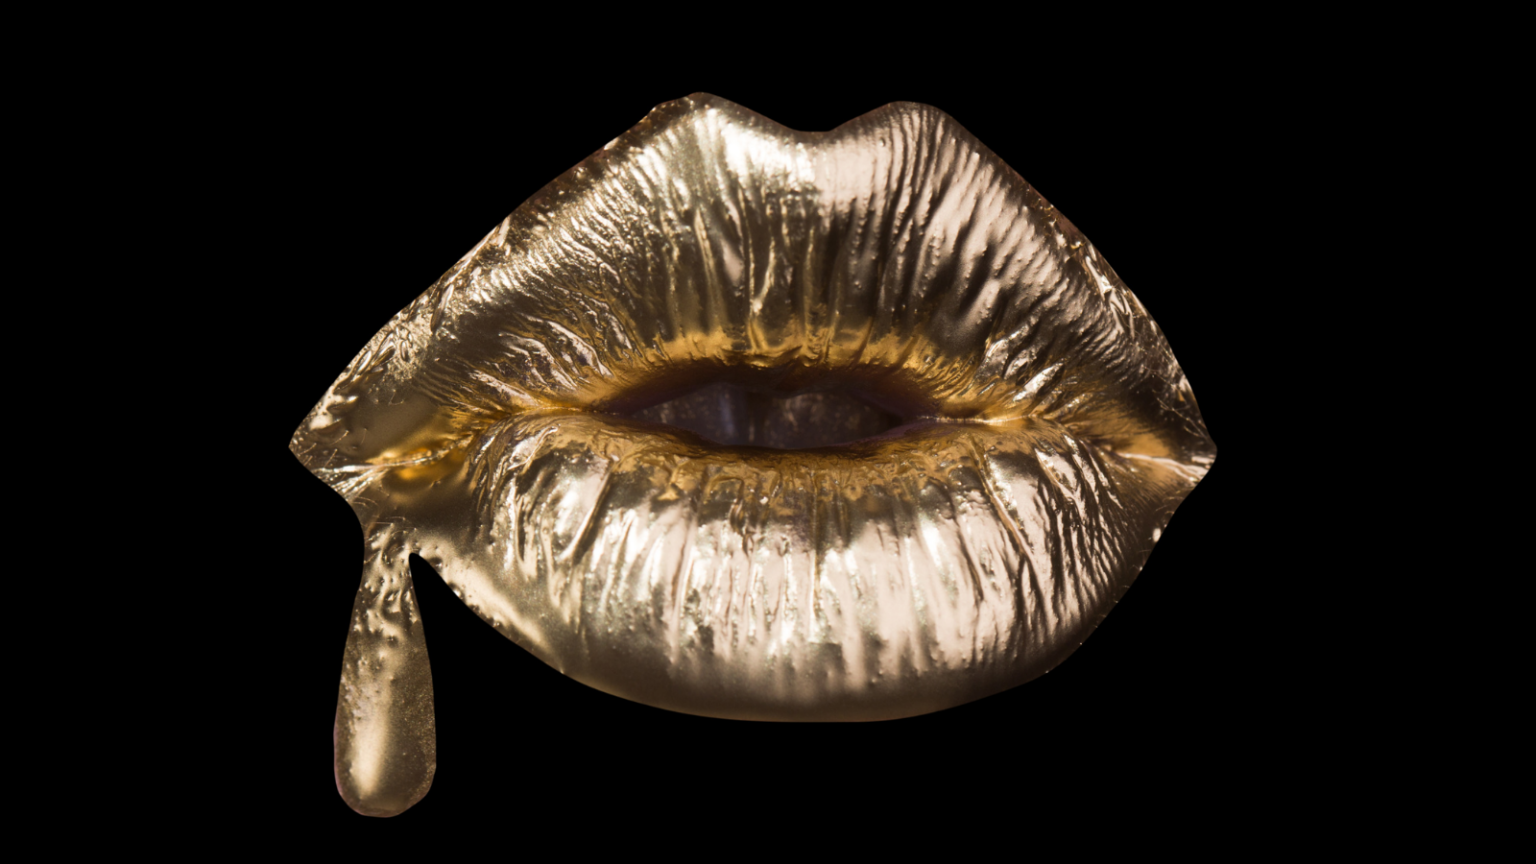 Image of gold lips with drip from the edge of the mouth